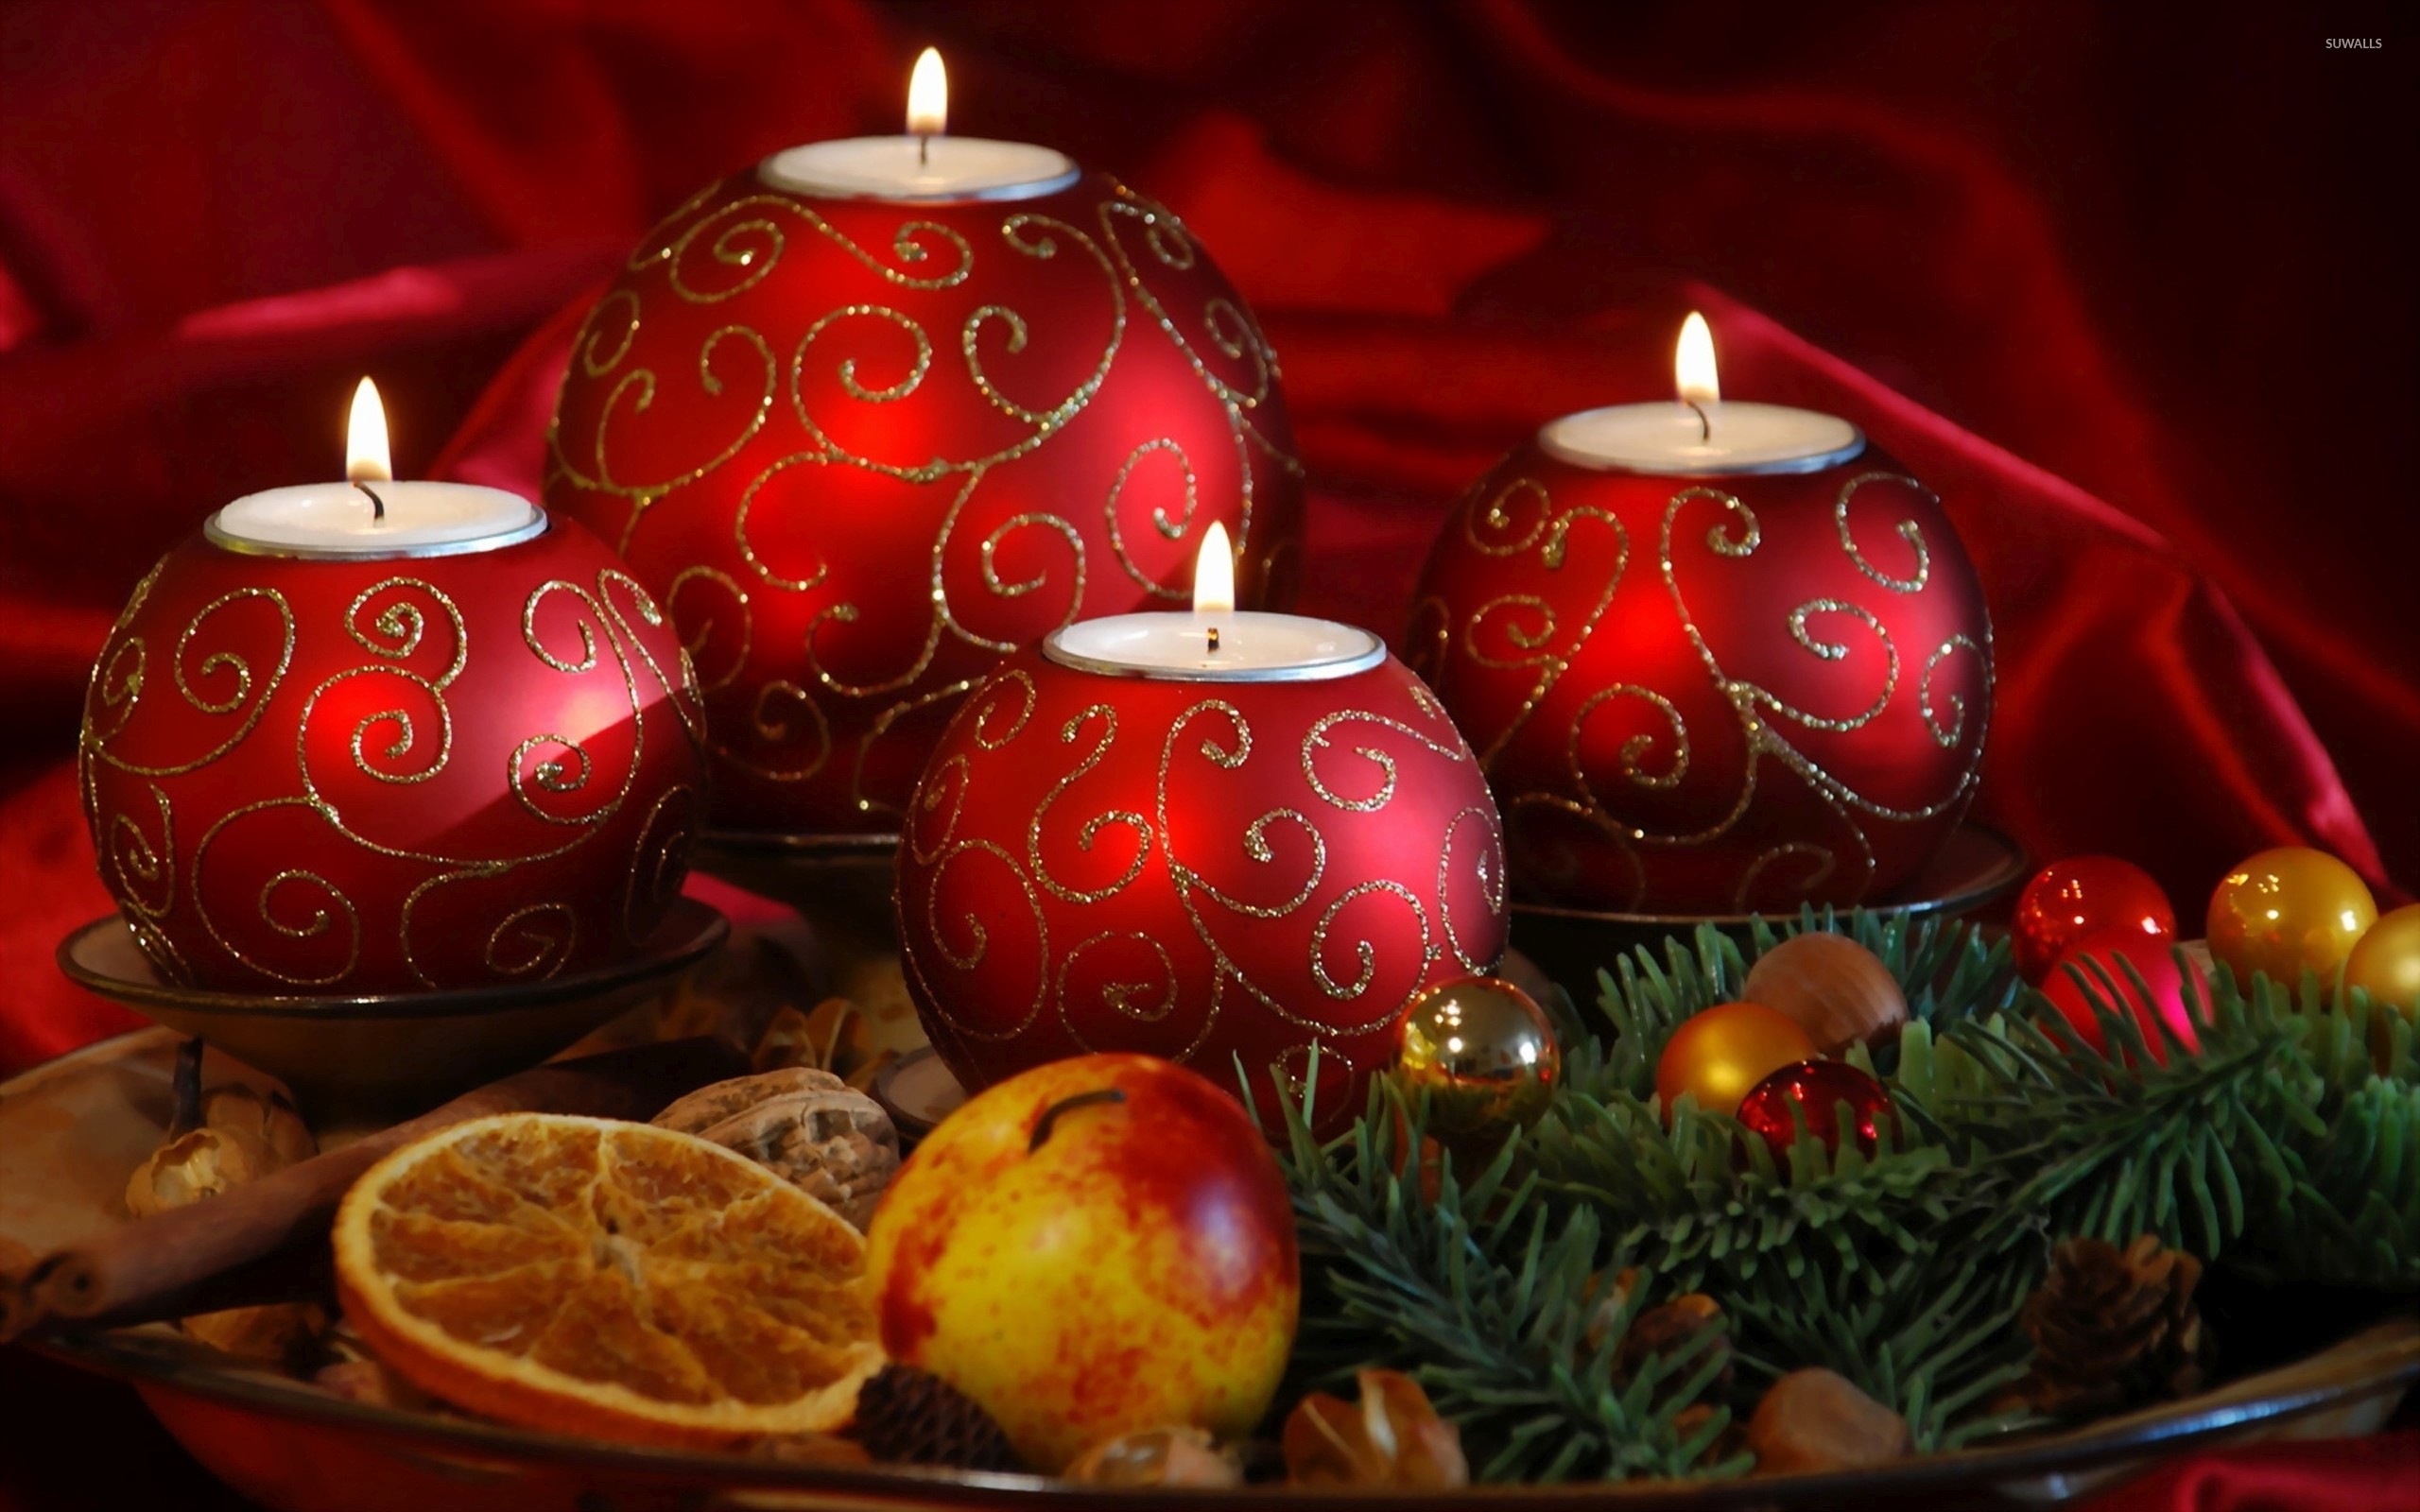 2560x1600 Red Christmas candles on a plate wallpaper